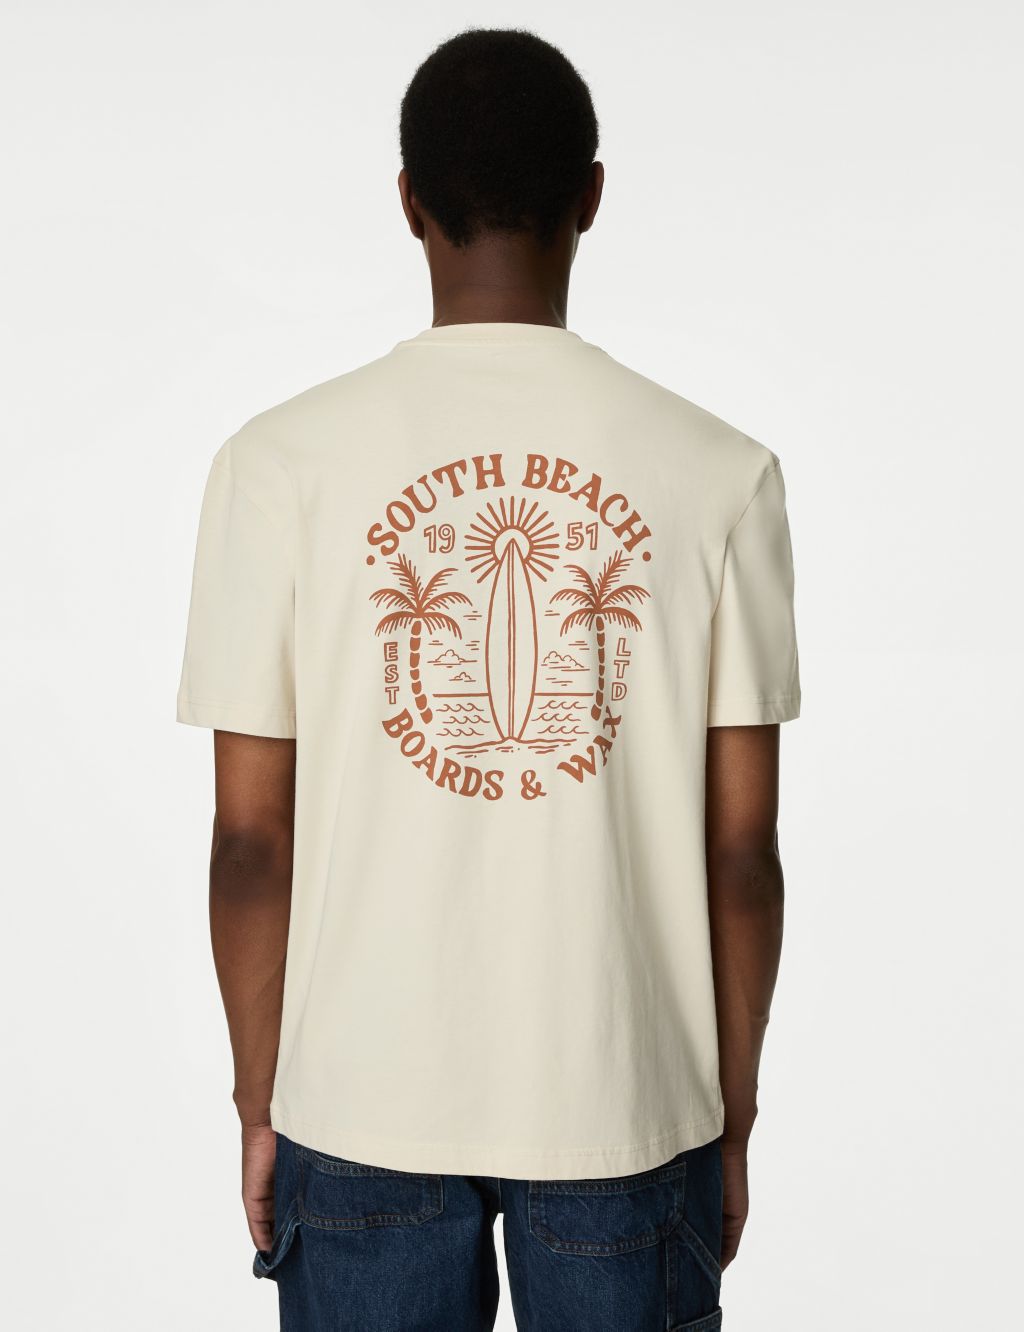 South Beach Graphic T-Shirt 5 of 5